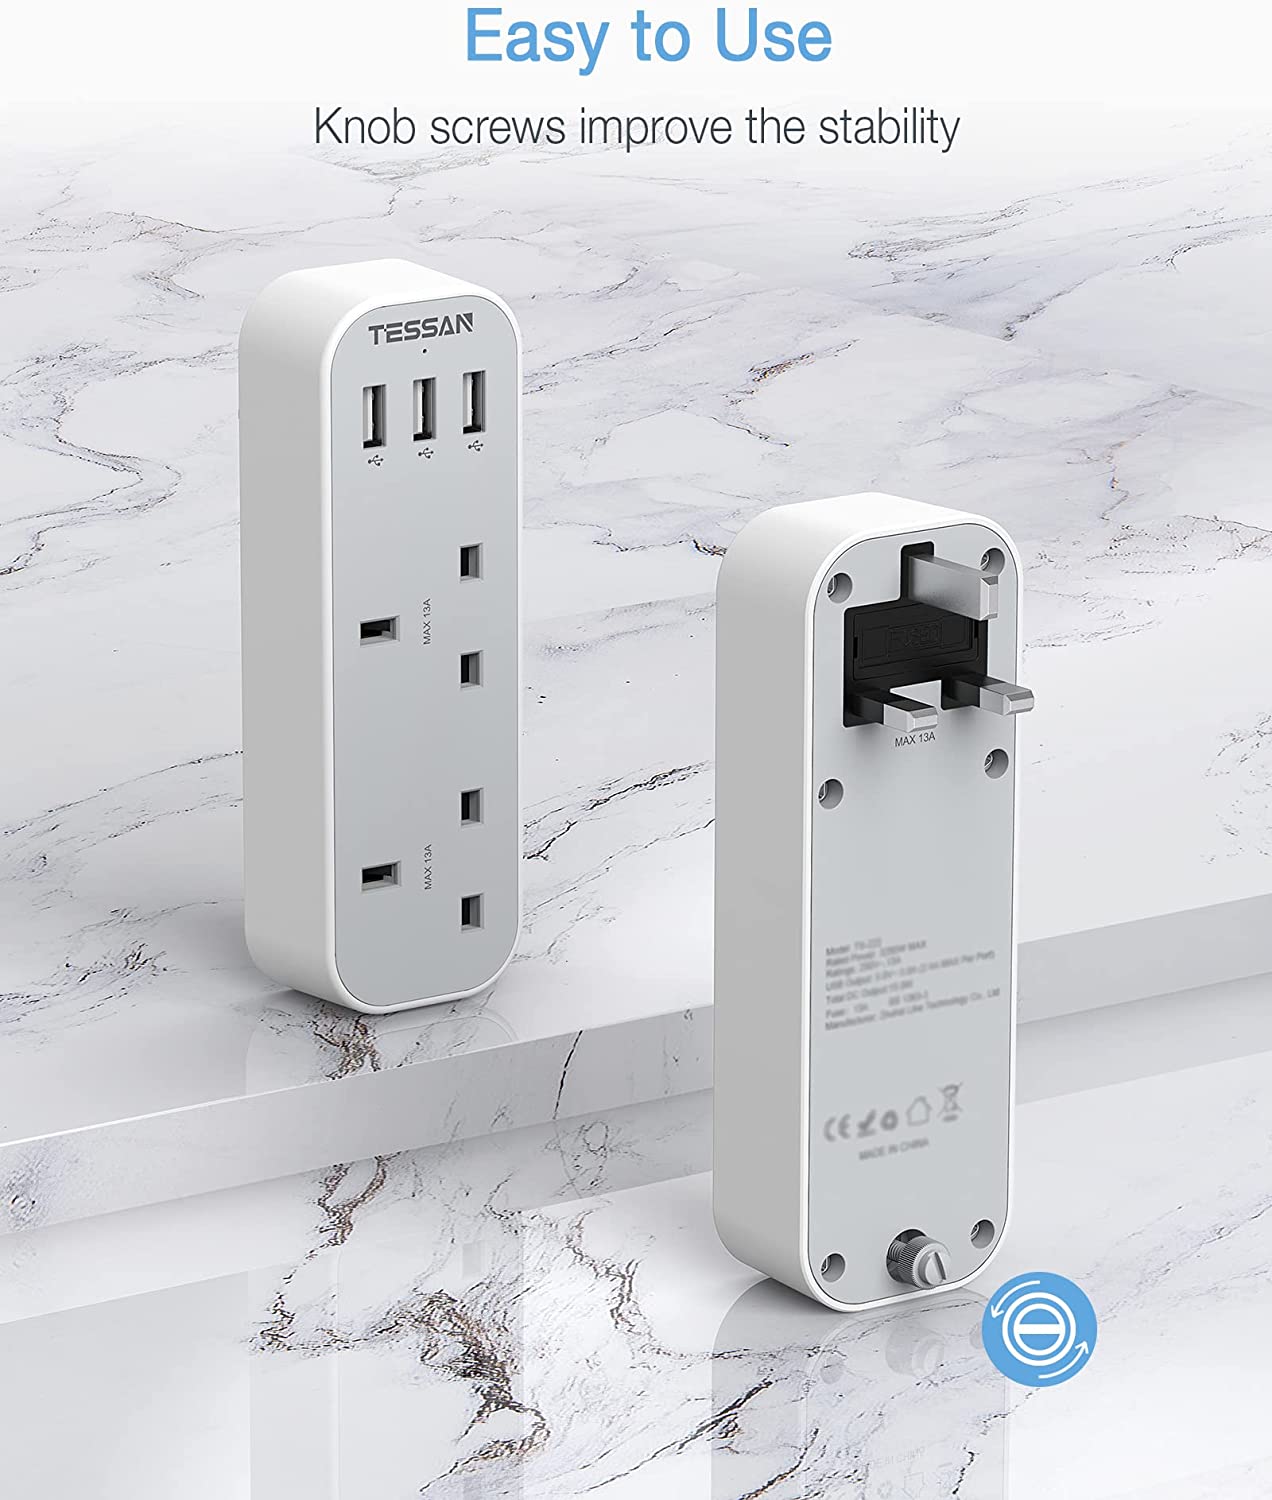 Multi Plug Extension Double Plug Adaptor with 2 Outlets and 3 USB Ports